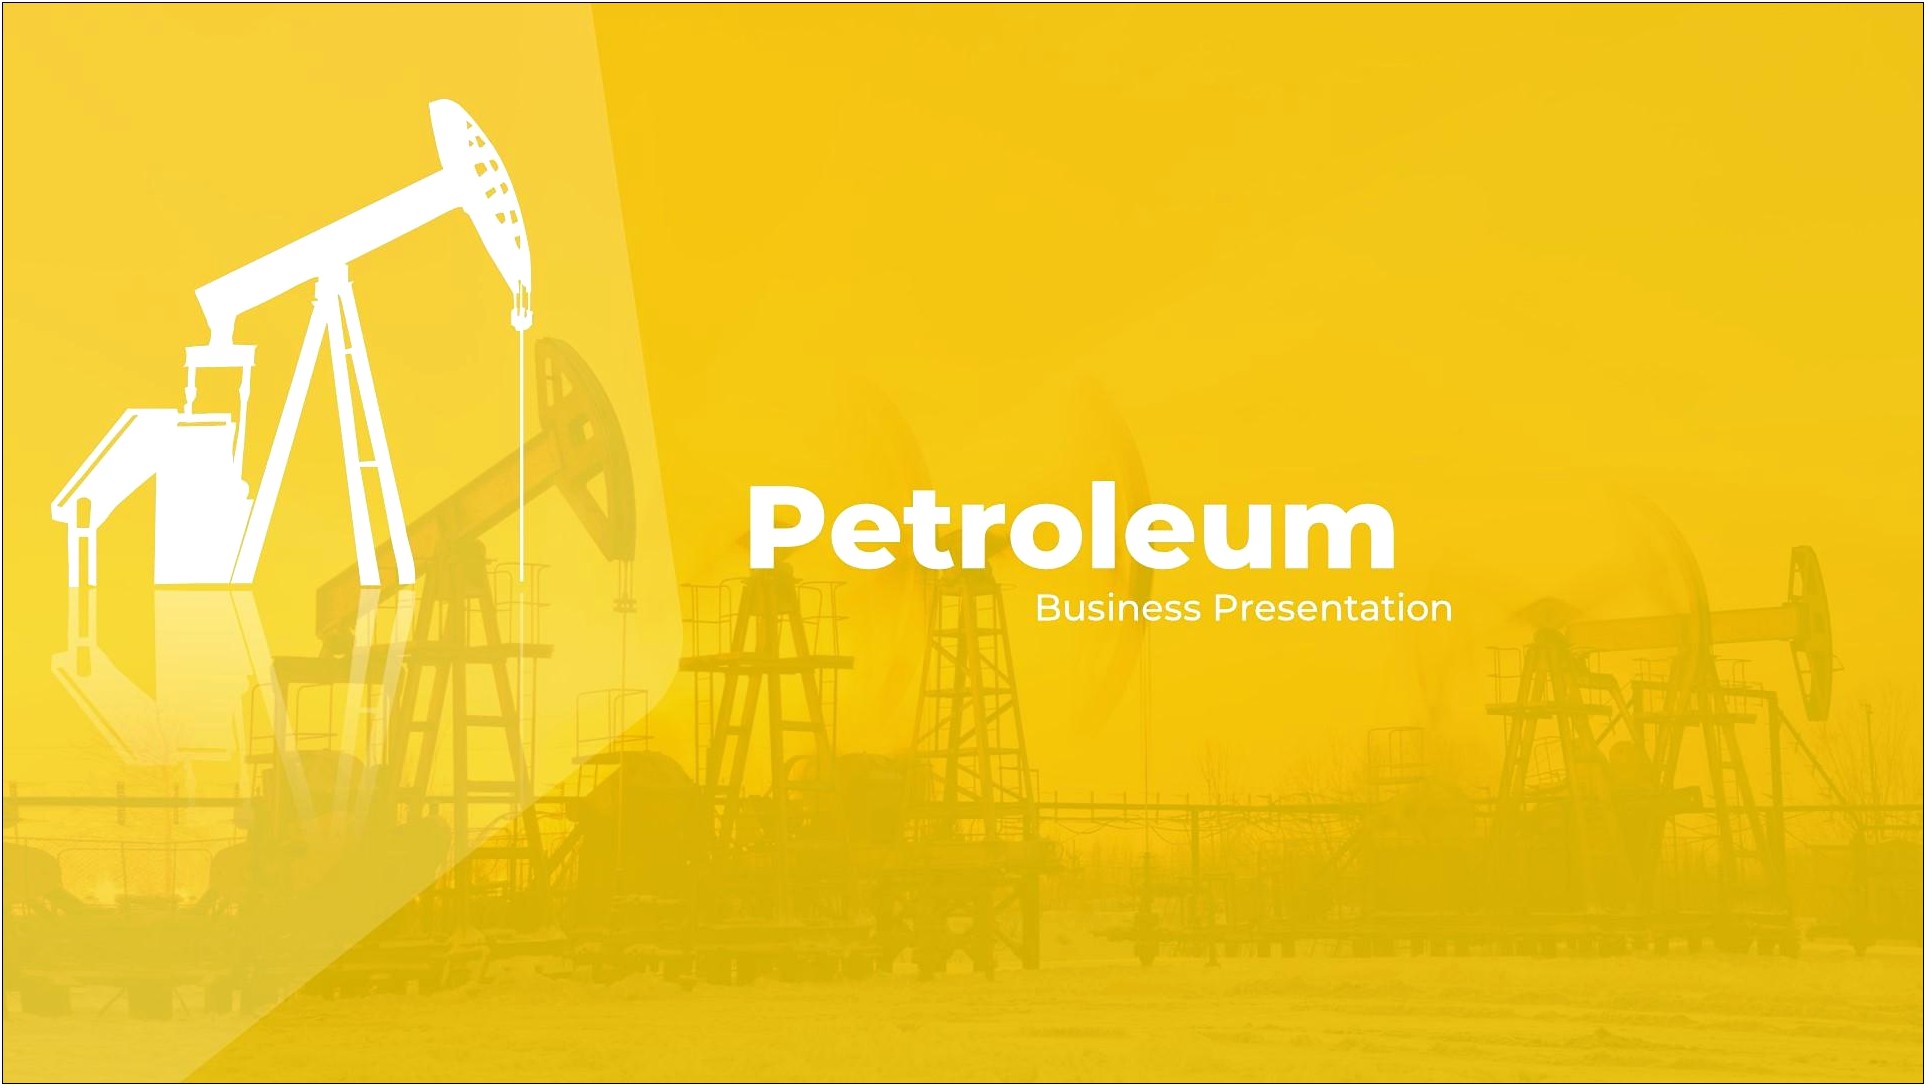 Free Powerpoint Templates For Oil And Gas Industry